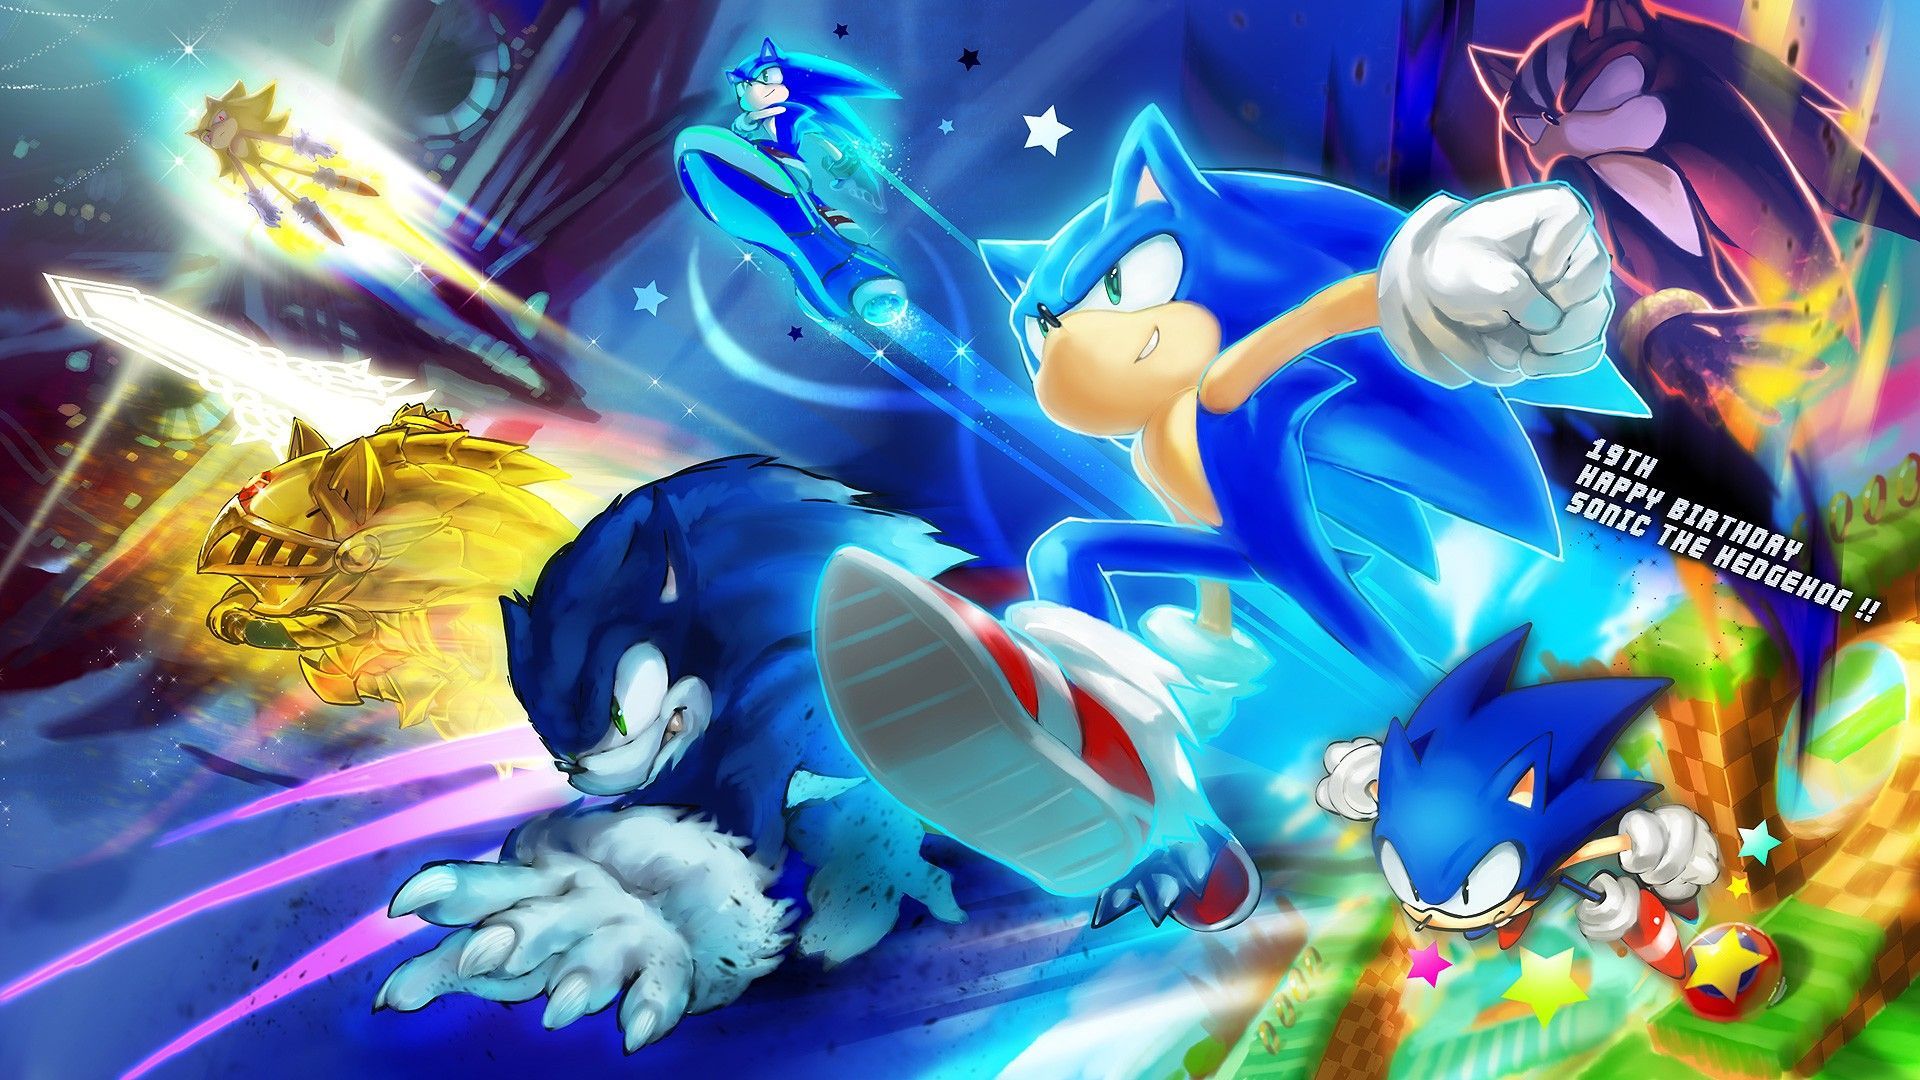 Sonic The Hedgehog Background. Sonic. Sonic